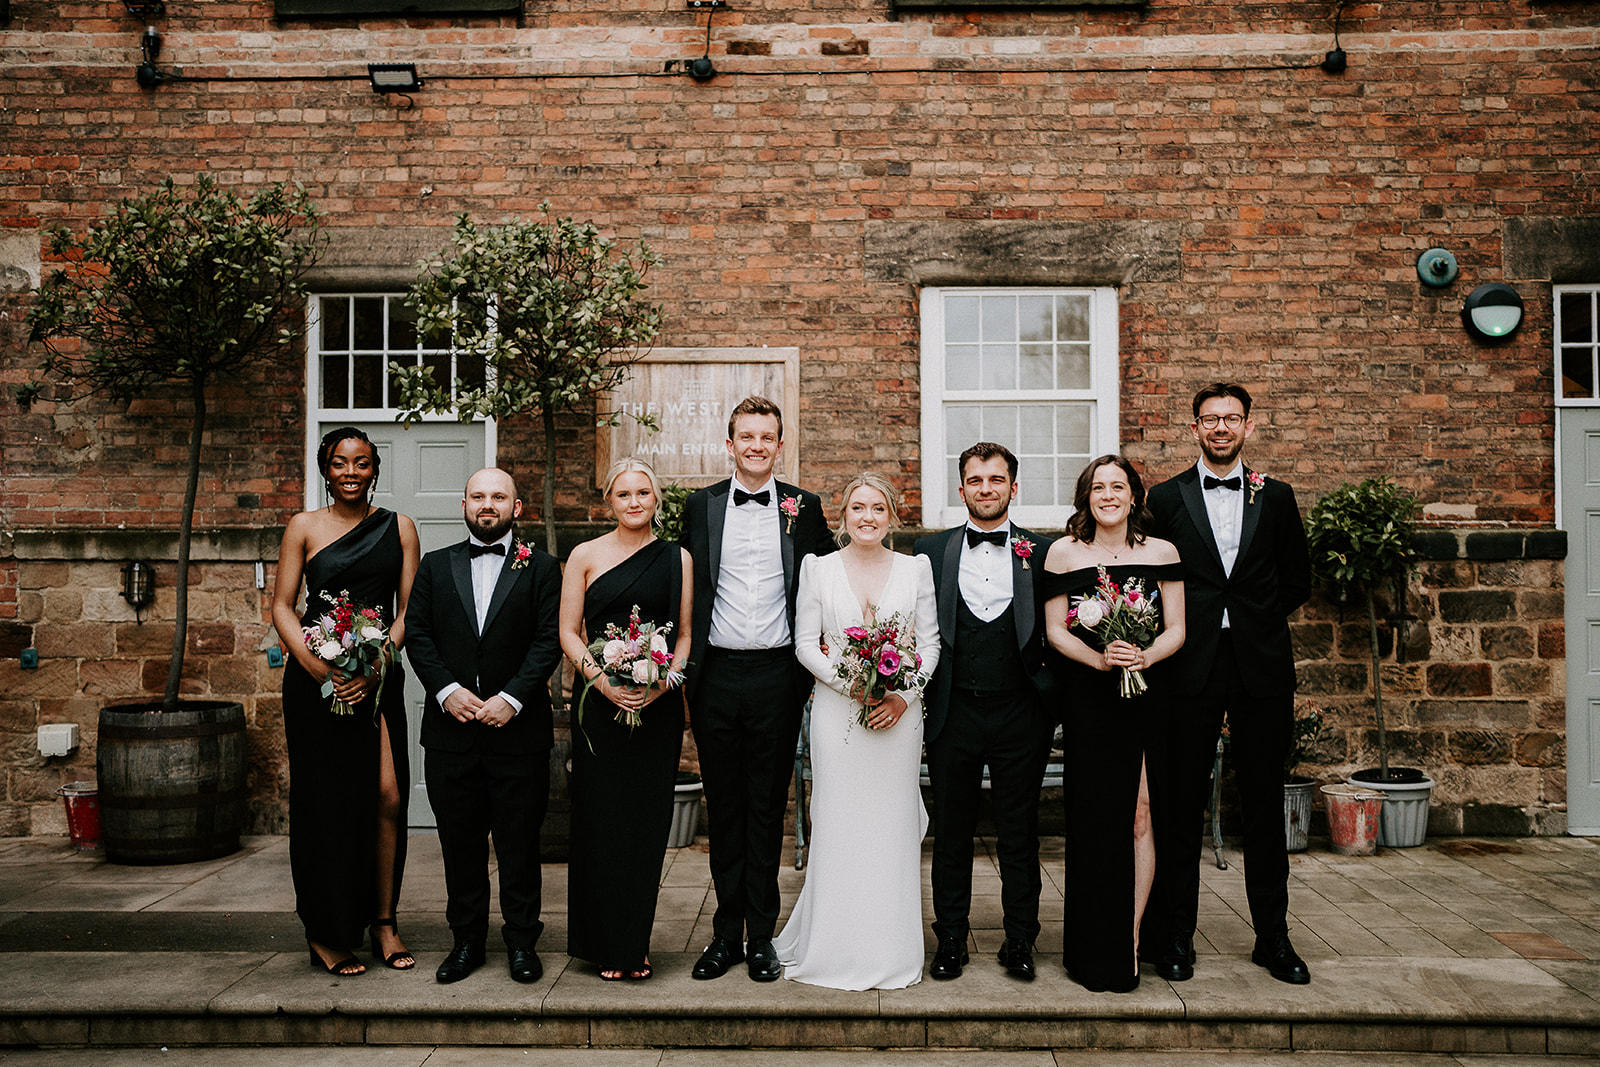 A Black Tie Wedding with Pops of Pink for Jamie & Seb at The West Mill, Derby